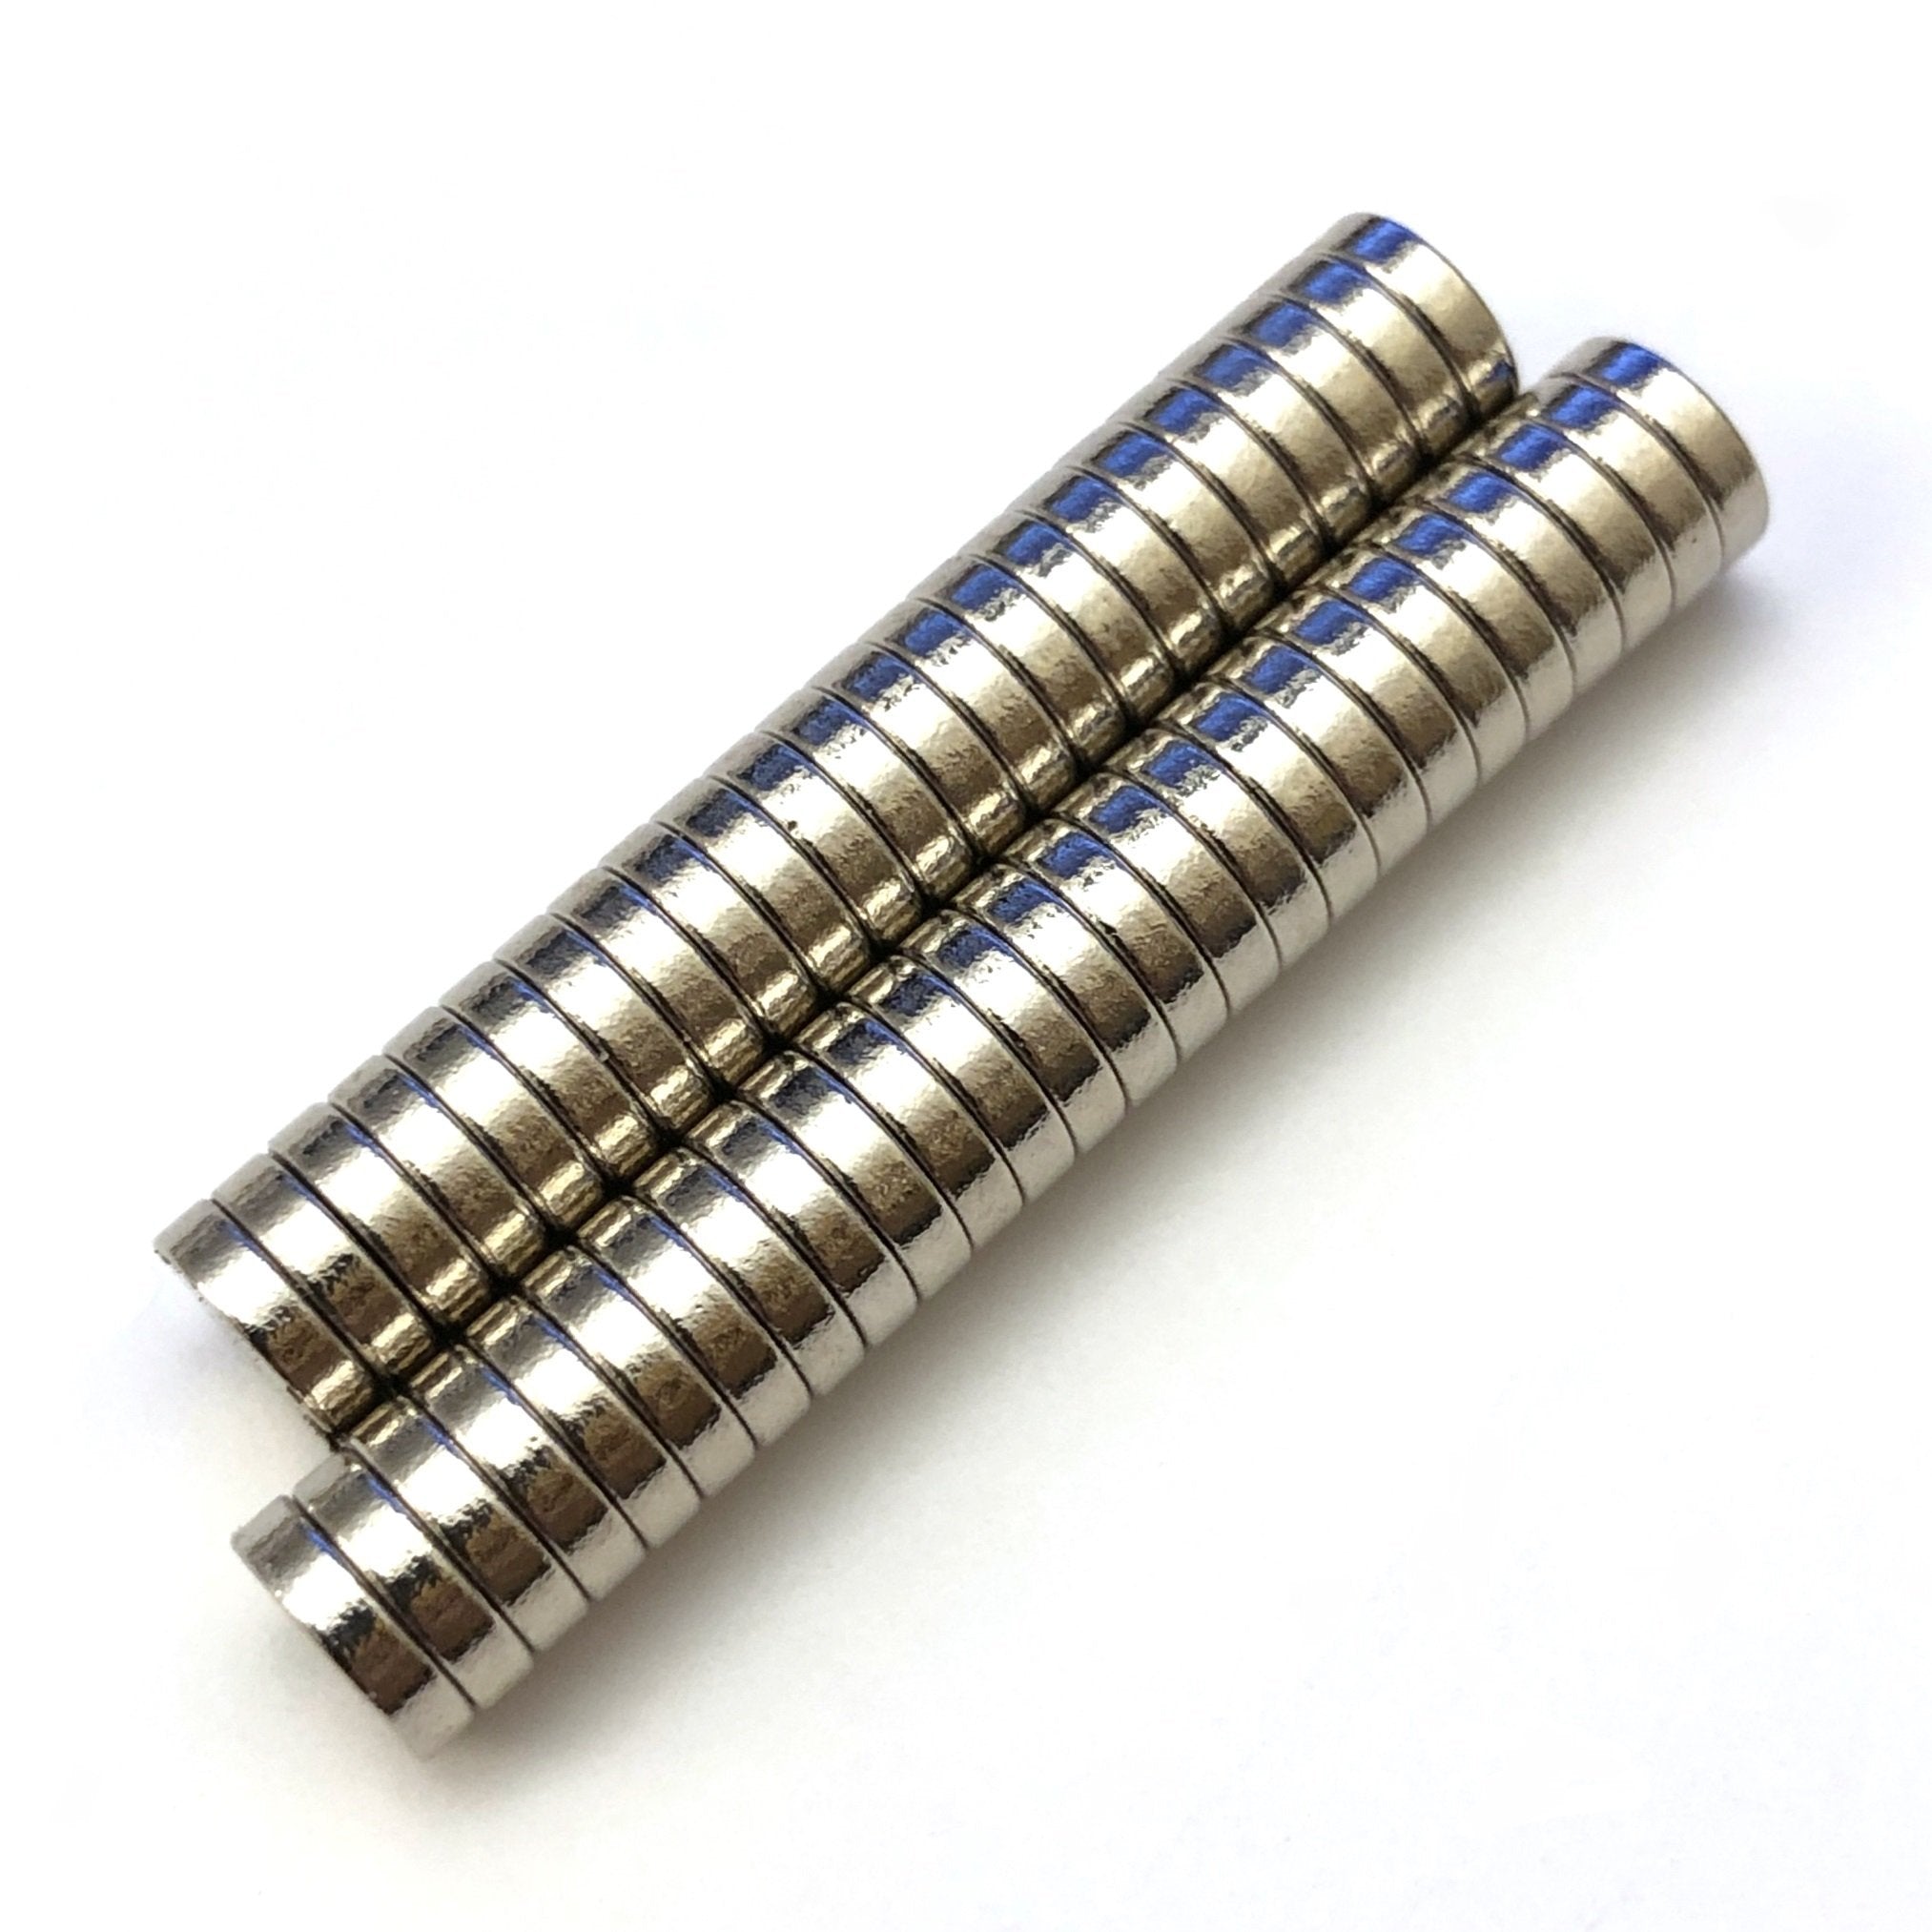 6X1.5MM Nickel Plated Magnets (50 pieces)